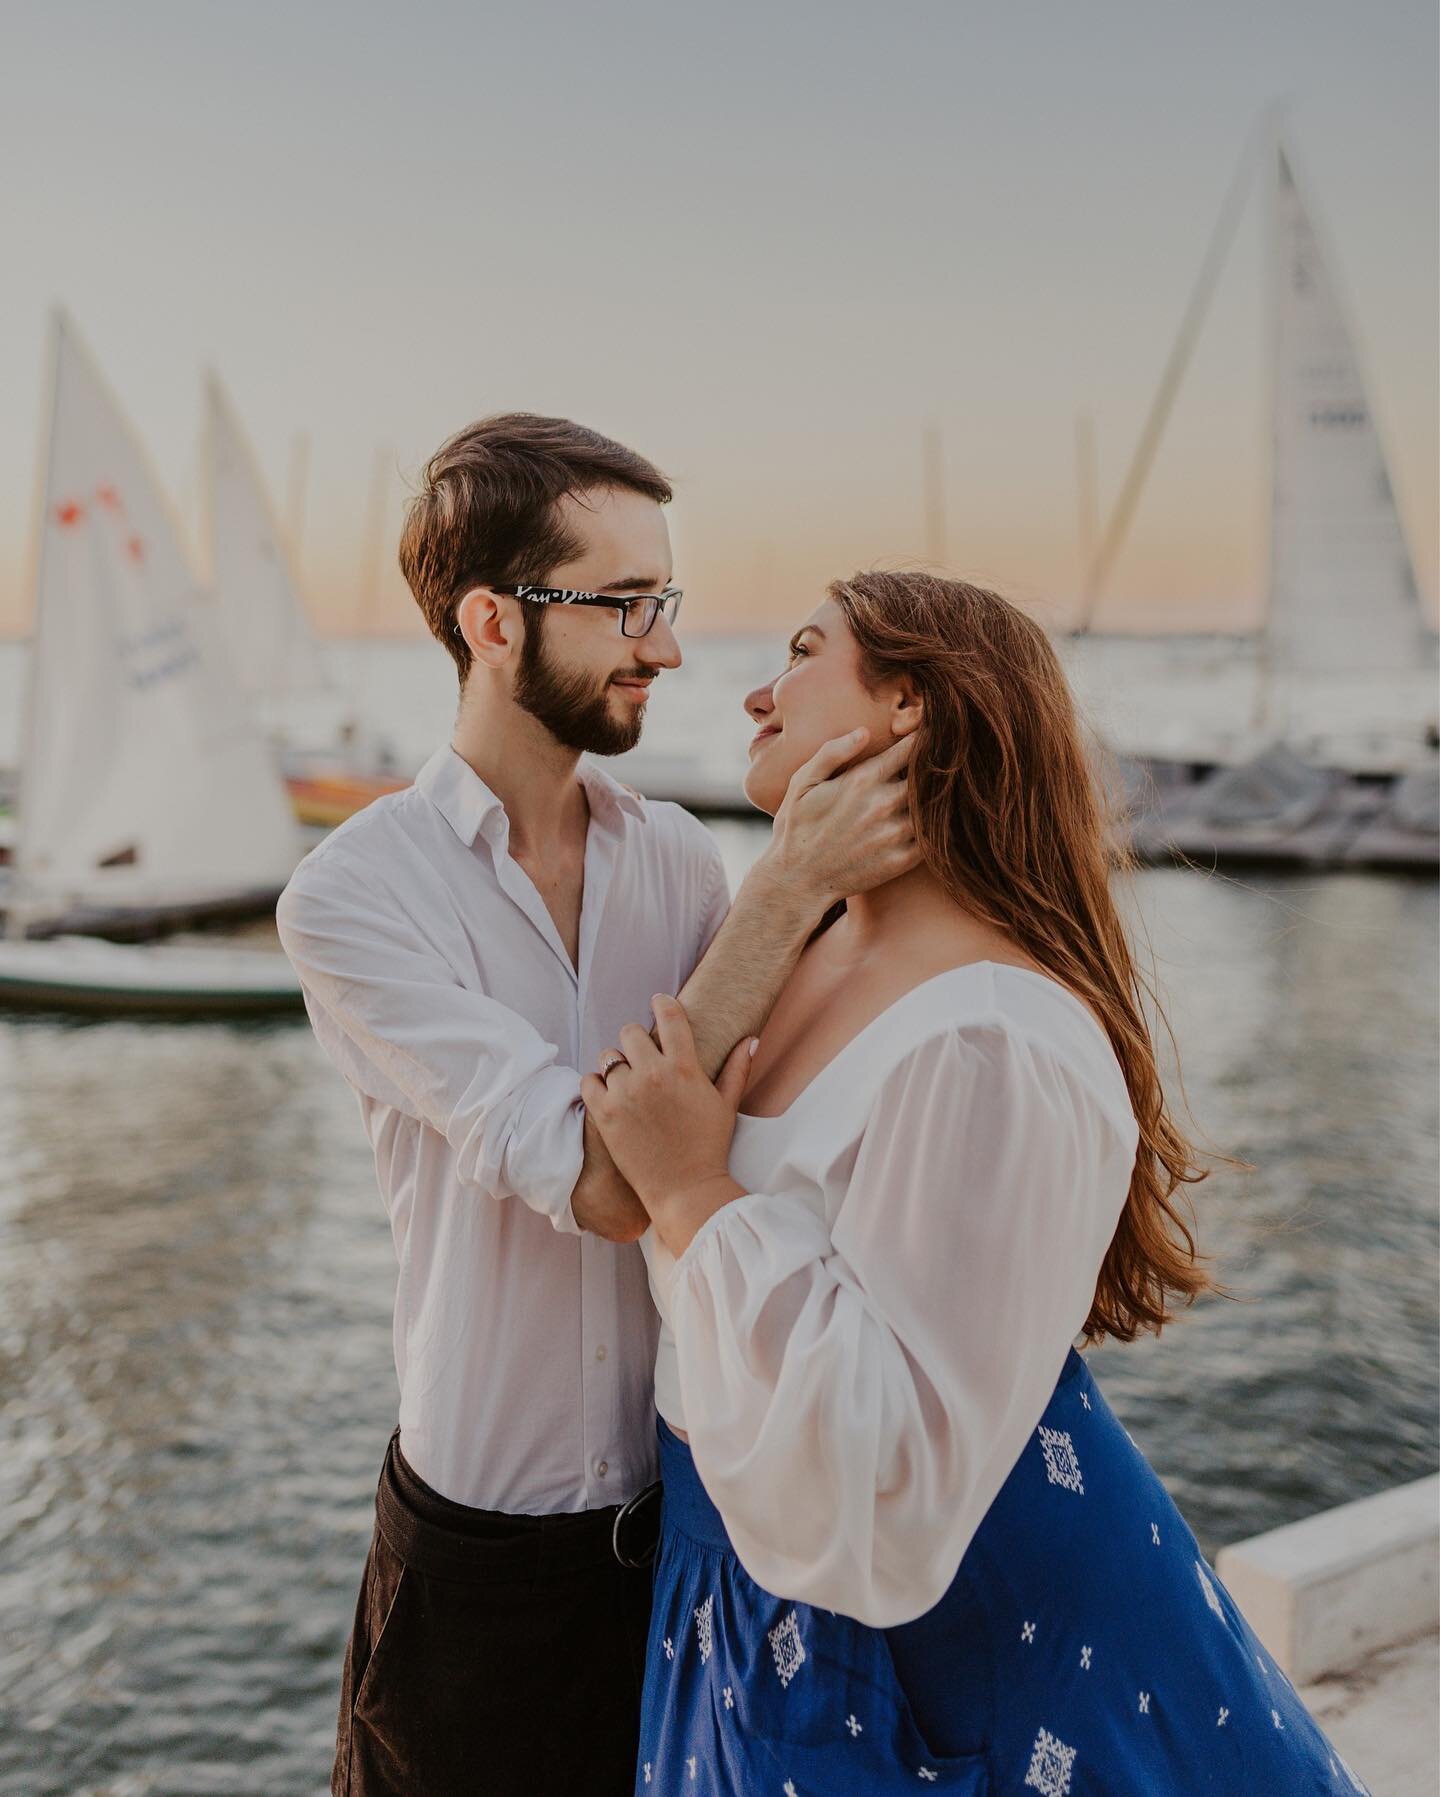 Th&eacute;r&egrave;se + Daniel met in Brussels, Belgium, when they were 18. They both moved to Belgium to work as Au Pairs (Th&eacute;r&egrave;se is American, and Daniel is German), and they encountered each other about a week after moving there at a